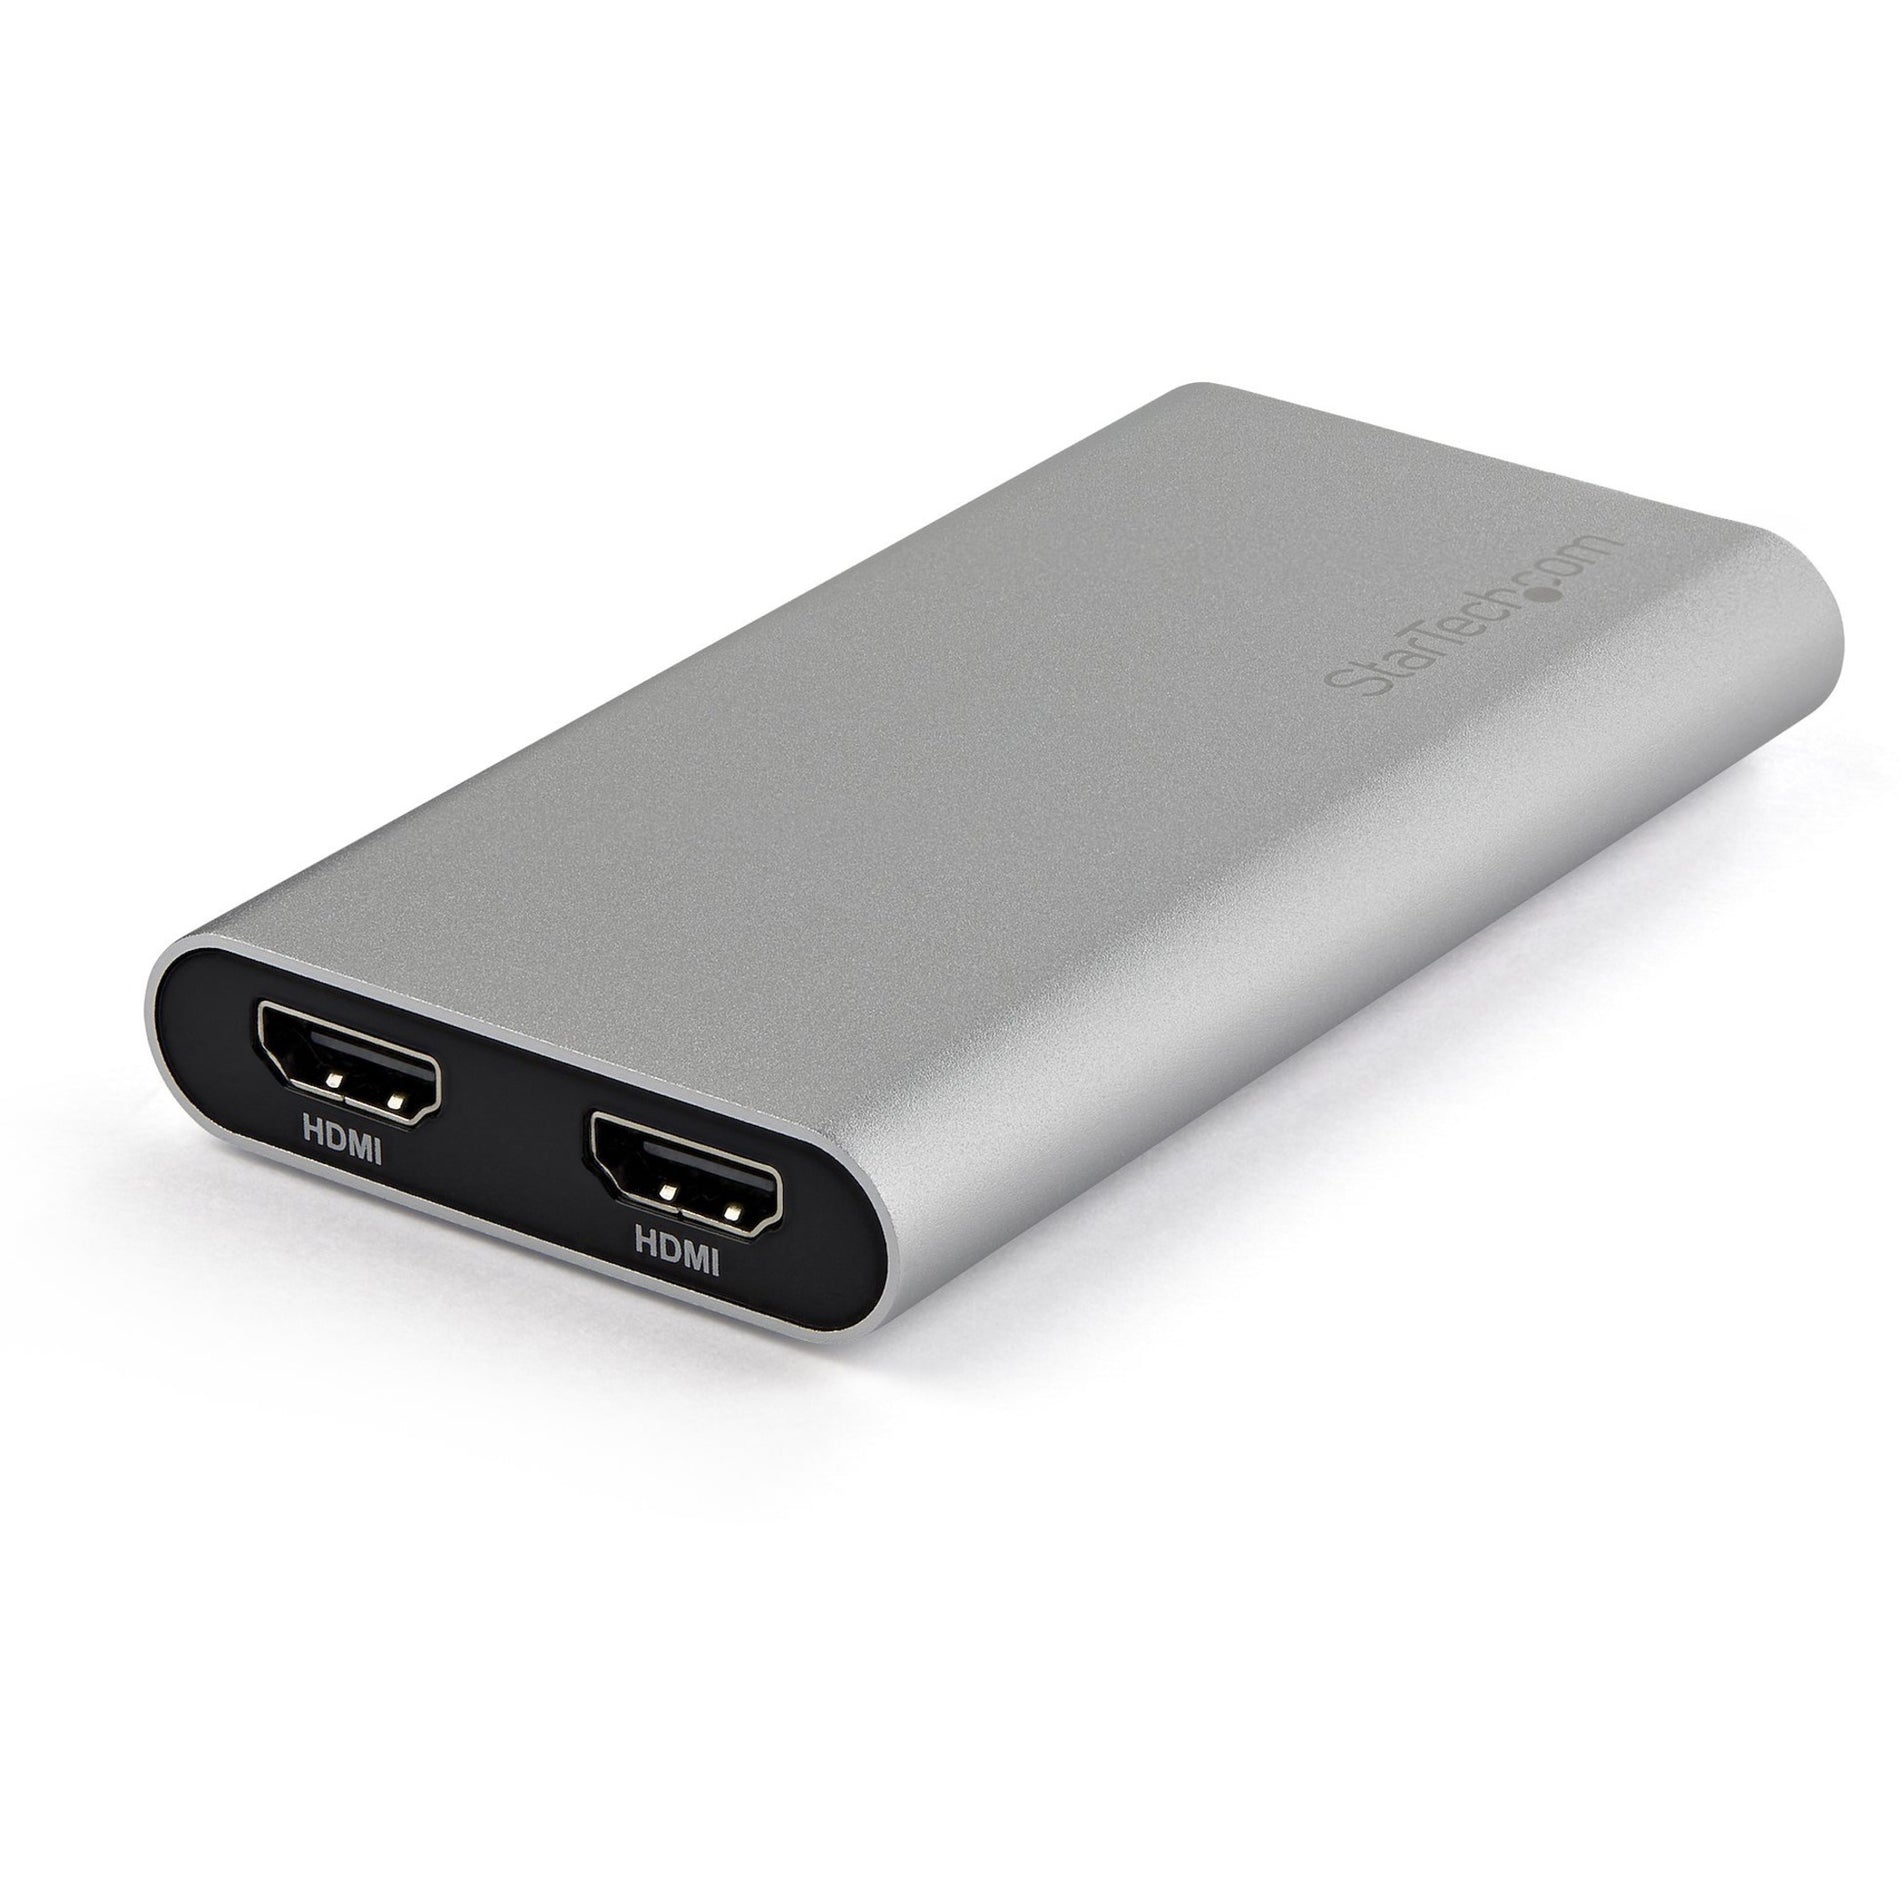 StarTech.com TB32HD24K60 Thunderbolt 3 to Dual HDMI Adapter - 4K 60Hz, Mac and Windows Compatible